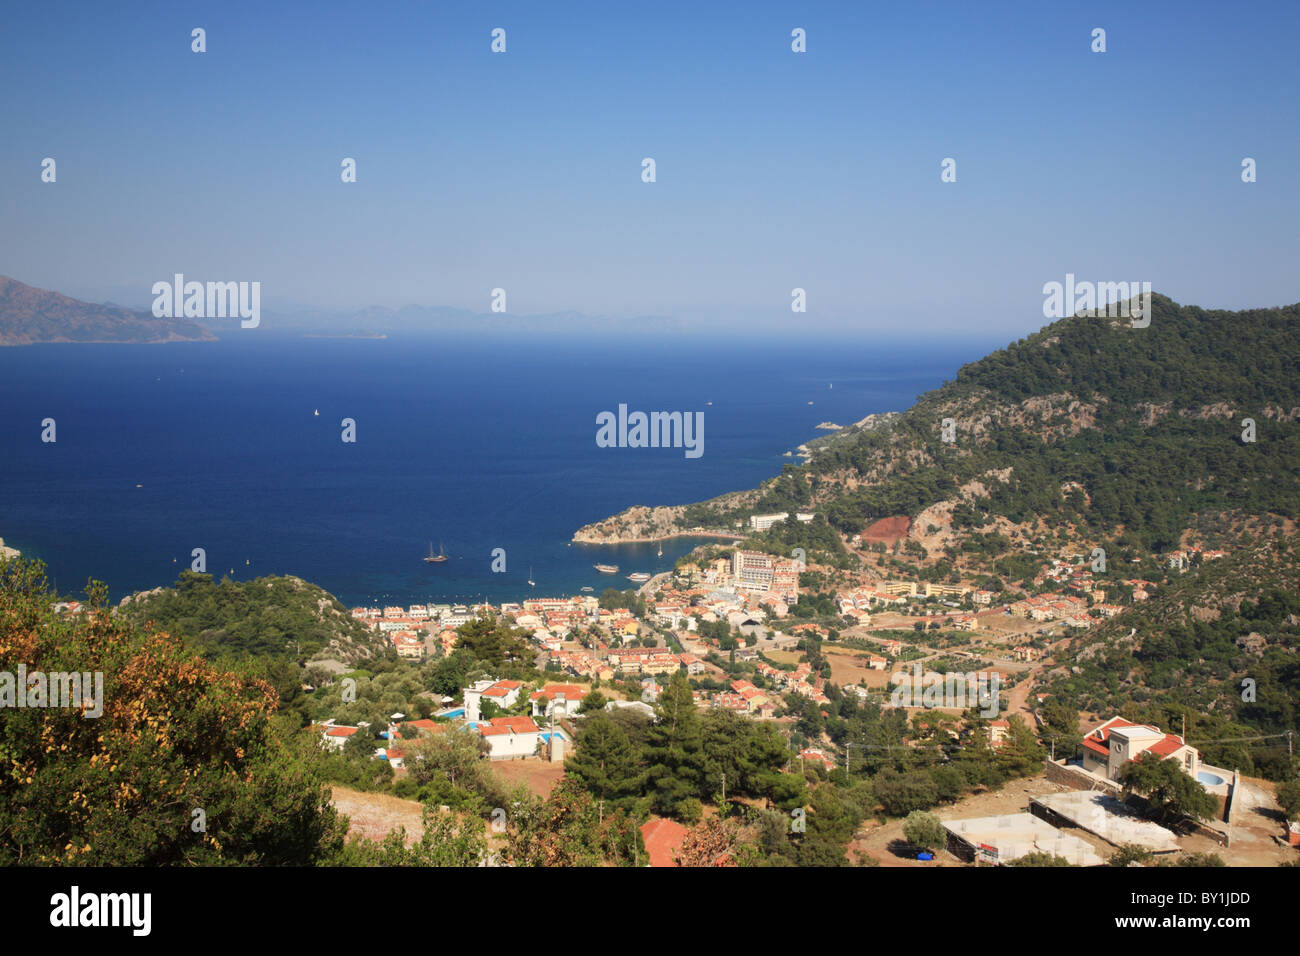 View of the bay of Turunc in Turkey Stock Photo